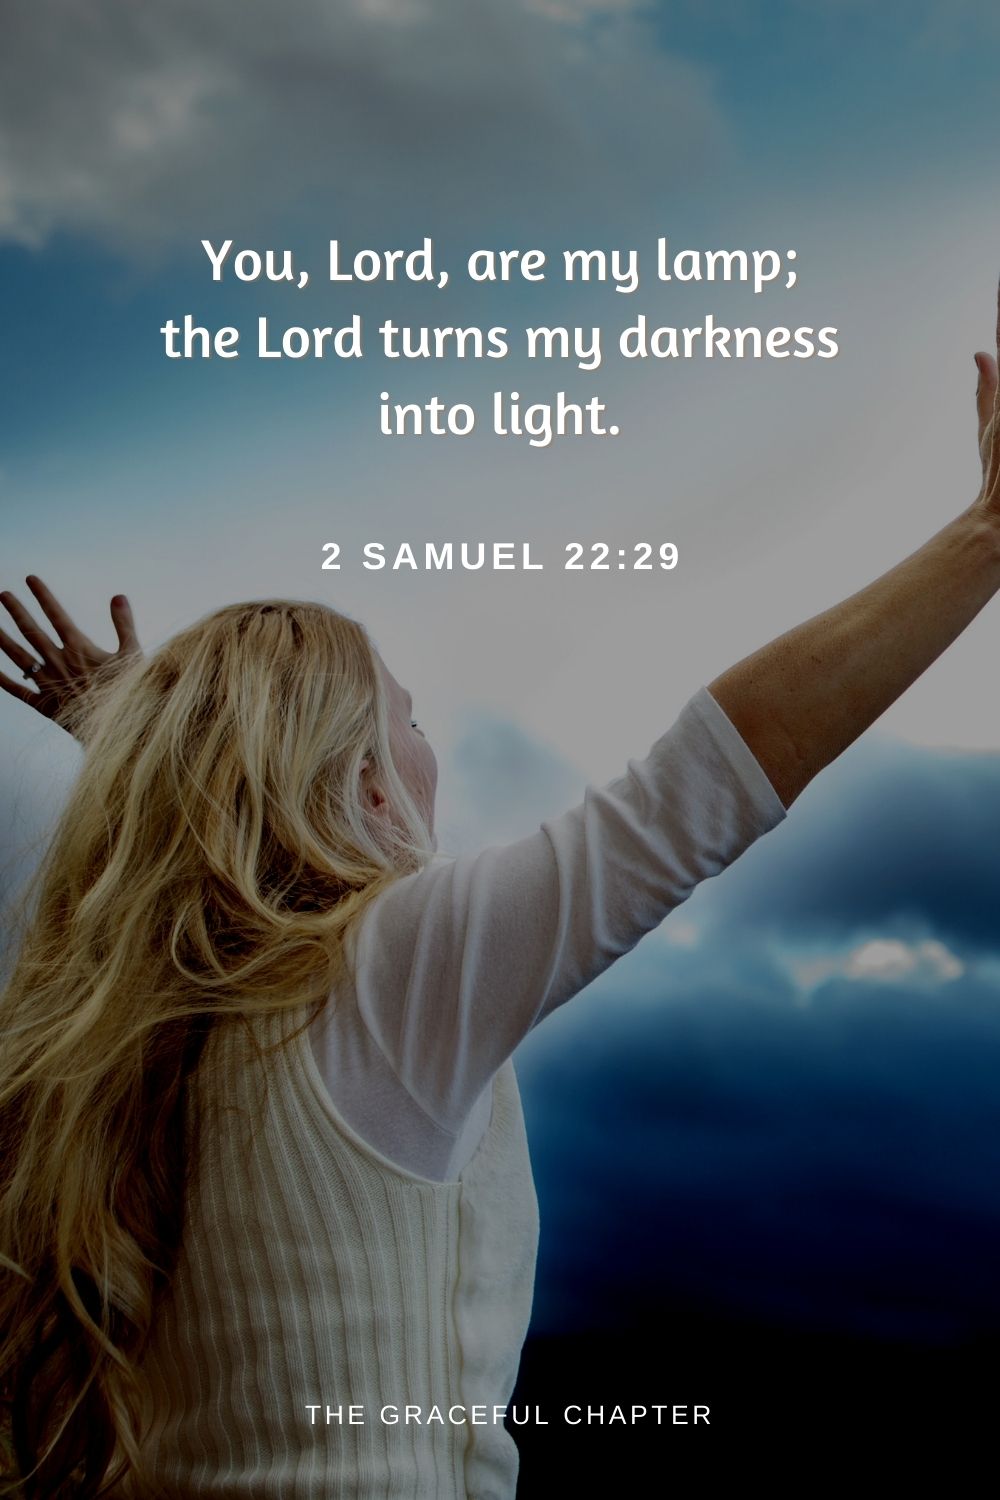 You, Lord, are my lamp; the Lord turns my darkness into light.